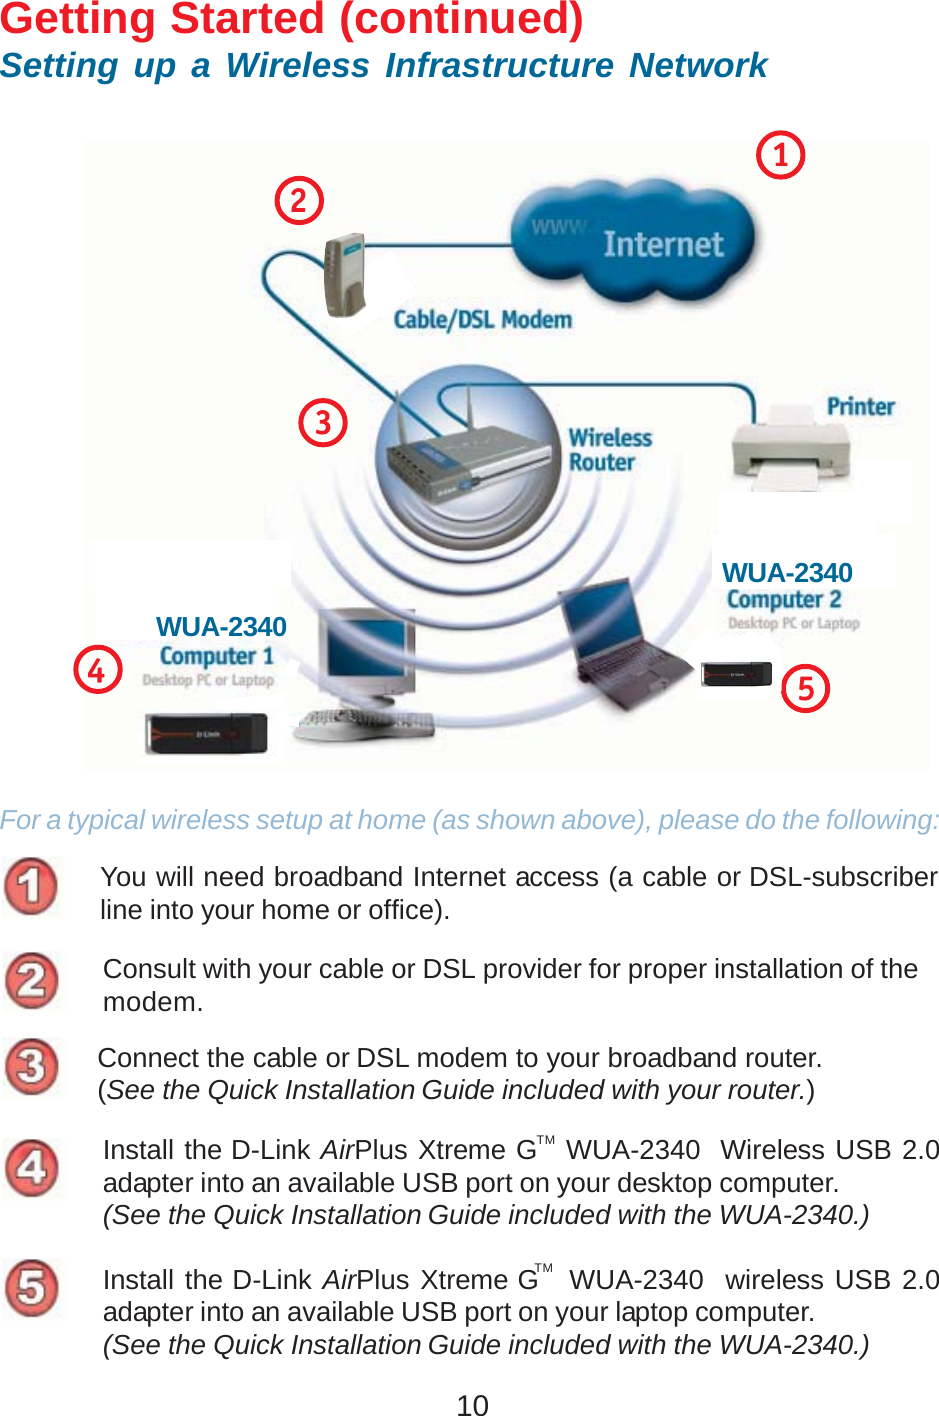 10You will need broadband Internet access (a cable or DSL-subscriberline into your home or office).Consult with your cable or DSL provider for proper installation of themodem.Connect the cable or DSL modem to your broadband router.(See the Quick Installation Guide included with your router.)Install the D-Link AirPlus Xtreme G   WUA-2340  Wireless USB 2.0adapter into an available USB port on your desktop computer.(See the Quick Installation Guide included with the WUA-2340.)Getting Started (continued)For a typical wireless setup at home (as shown above), please do the following:5Setting up a Wireless Infrastructure Network123Install the D-Link AirPlus Xtreme G   WUA-2340  wireless USB 2.0adapter into an available USB port on your laptop computer.(See the Quick Installation Guide included with the WUA-2340.)4TMWUA-2340WUA-2340TM